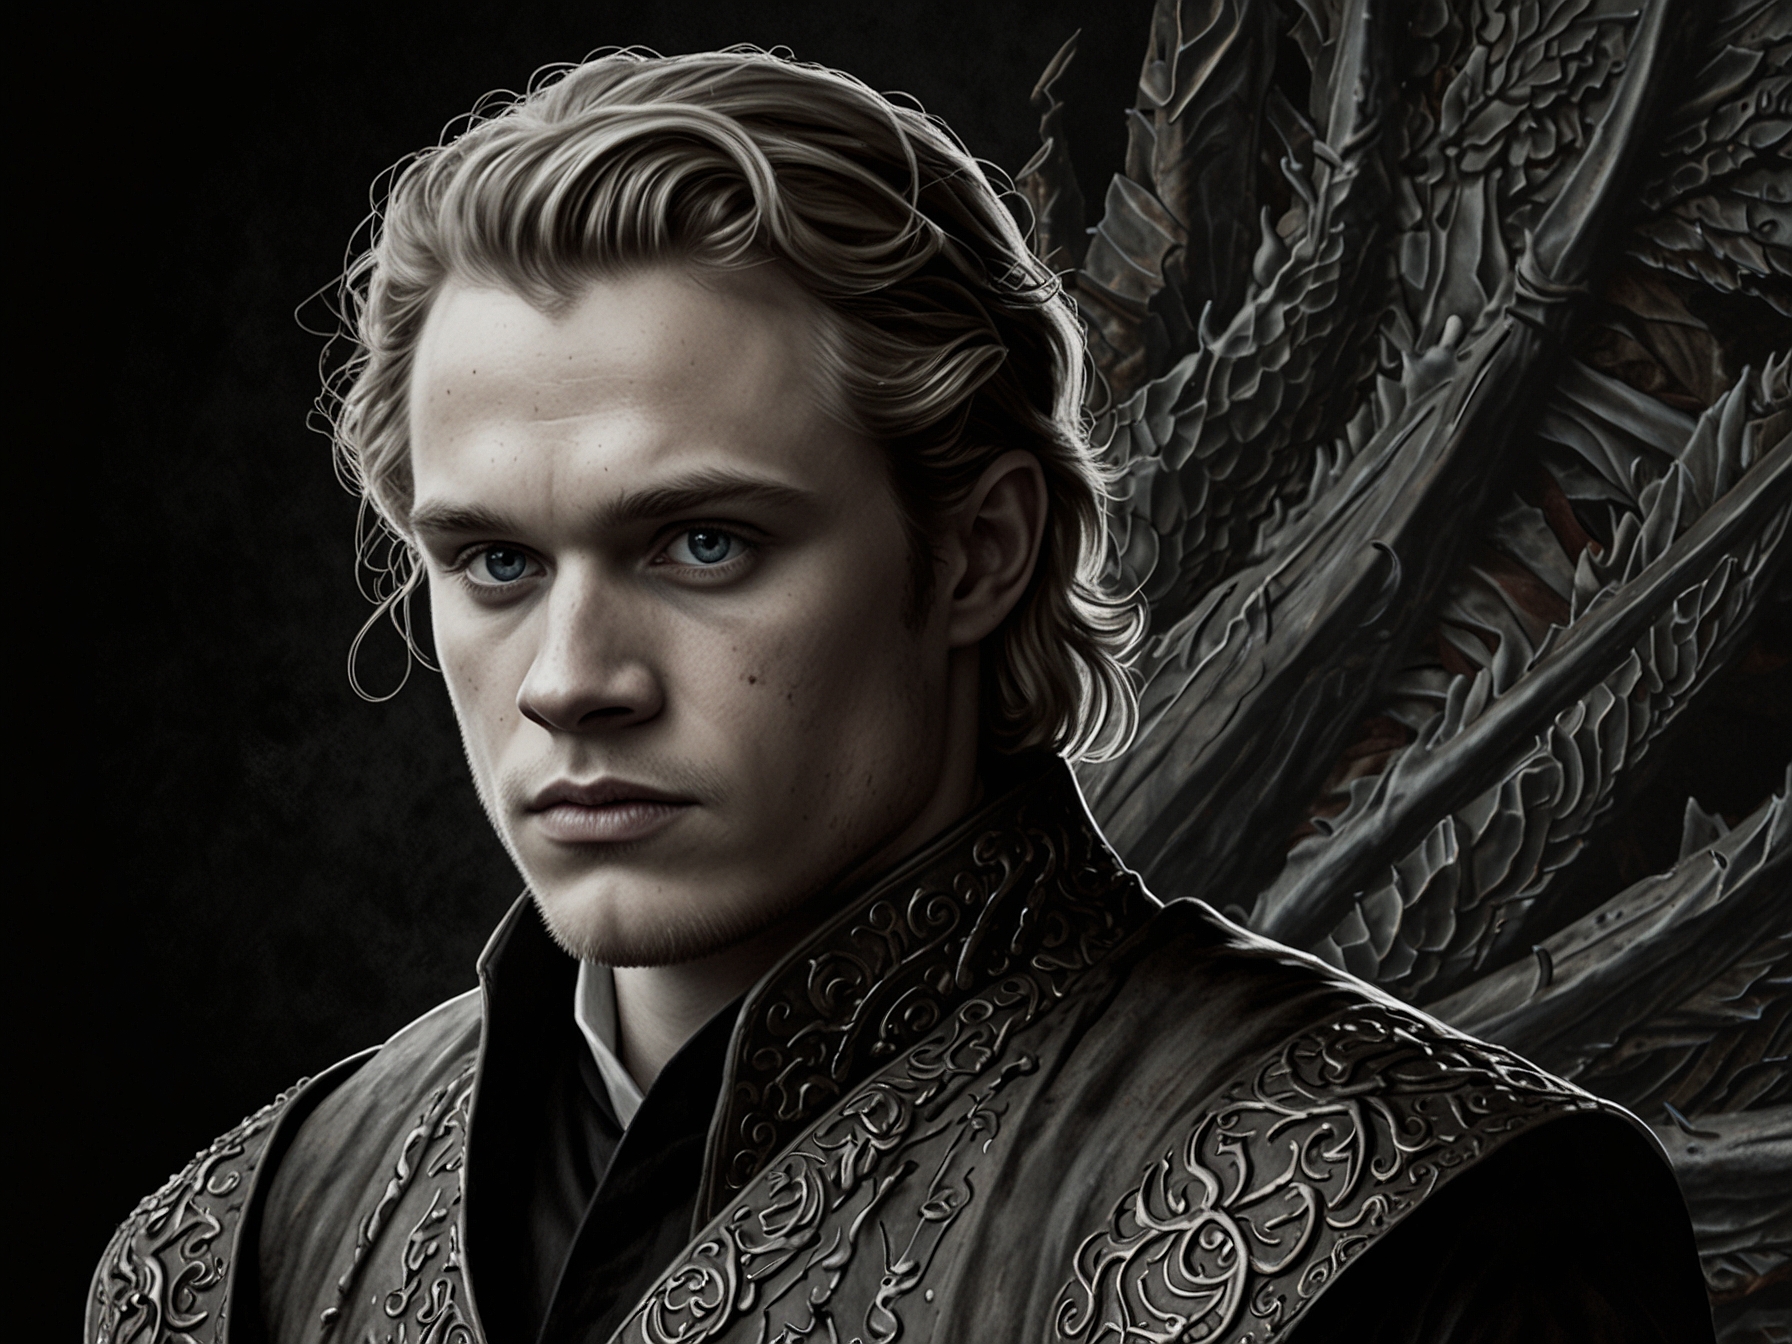 Tom Glynn-Carney, in character as Aegon II Targaryen, portraying the intense and morally complex nature of his role. This image underscores the depth and nuance brought to the character in 'House of the Dragon'.